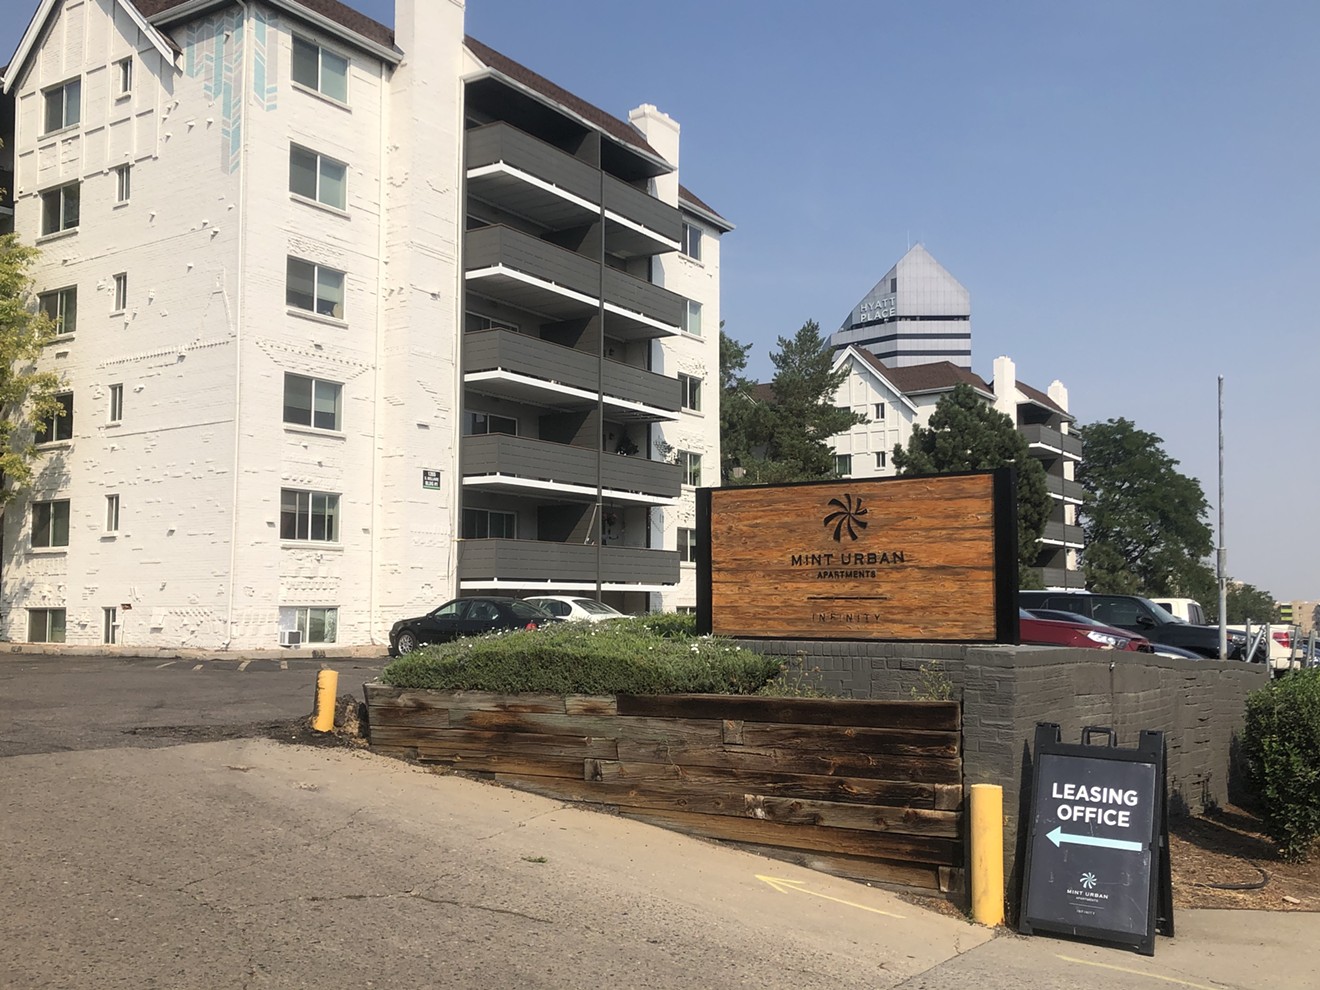 Tenants at the Mint Urban Infinity apartment complex filed a class-action lawsuit last fall because of concerns about conditions.